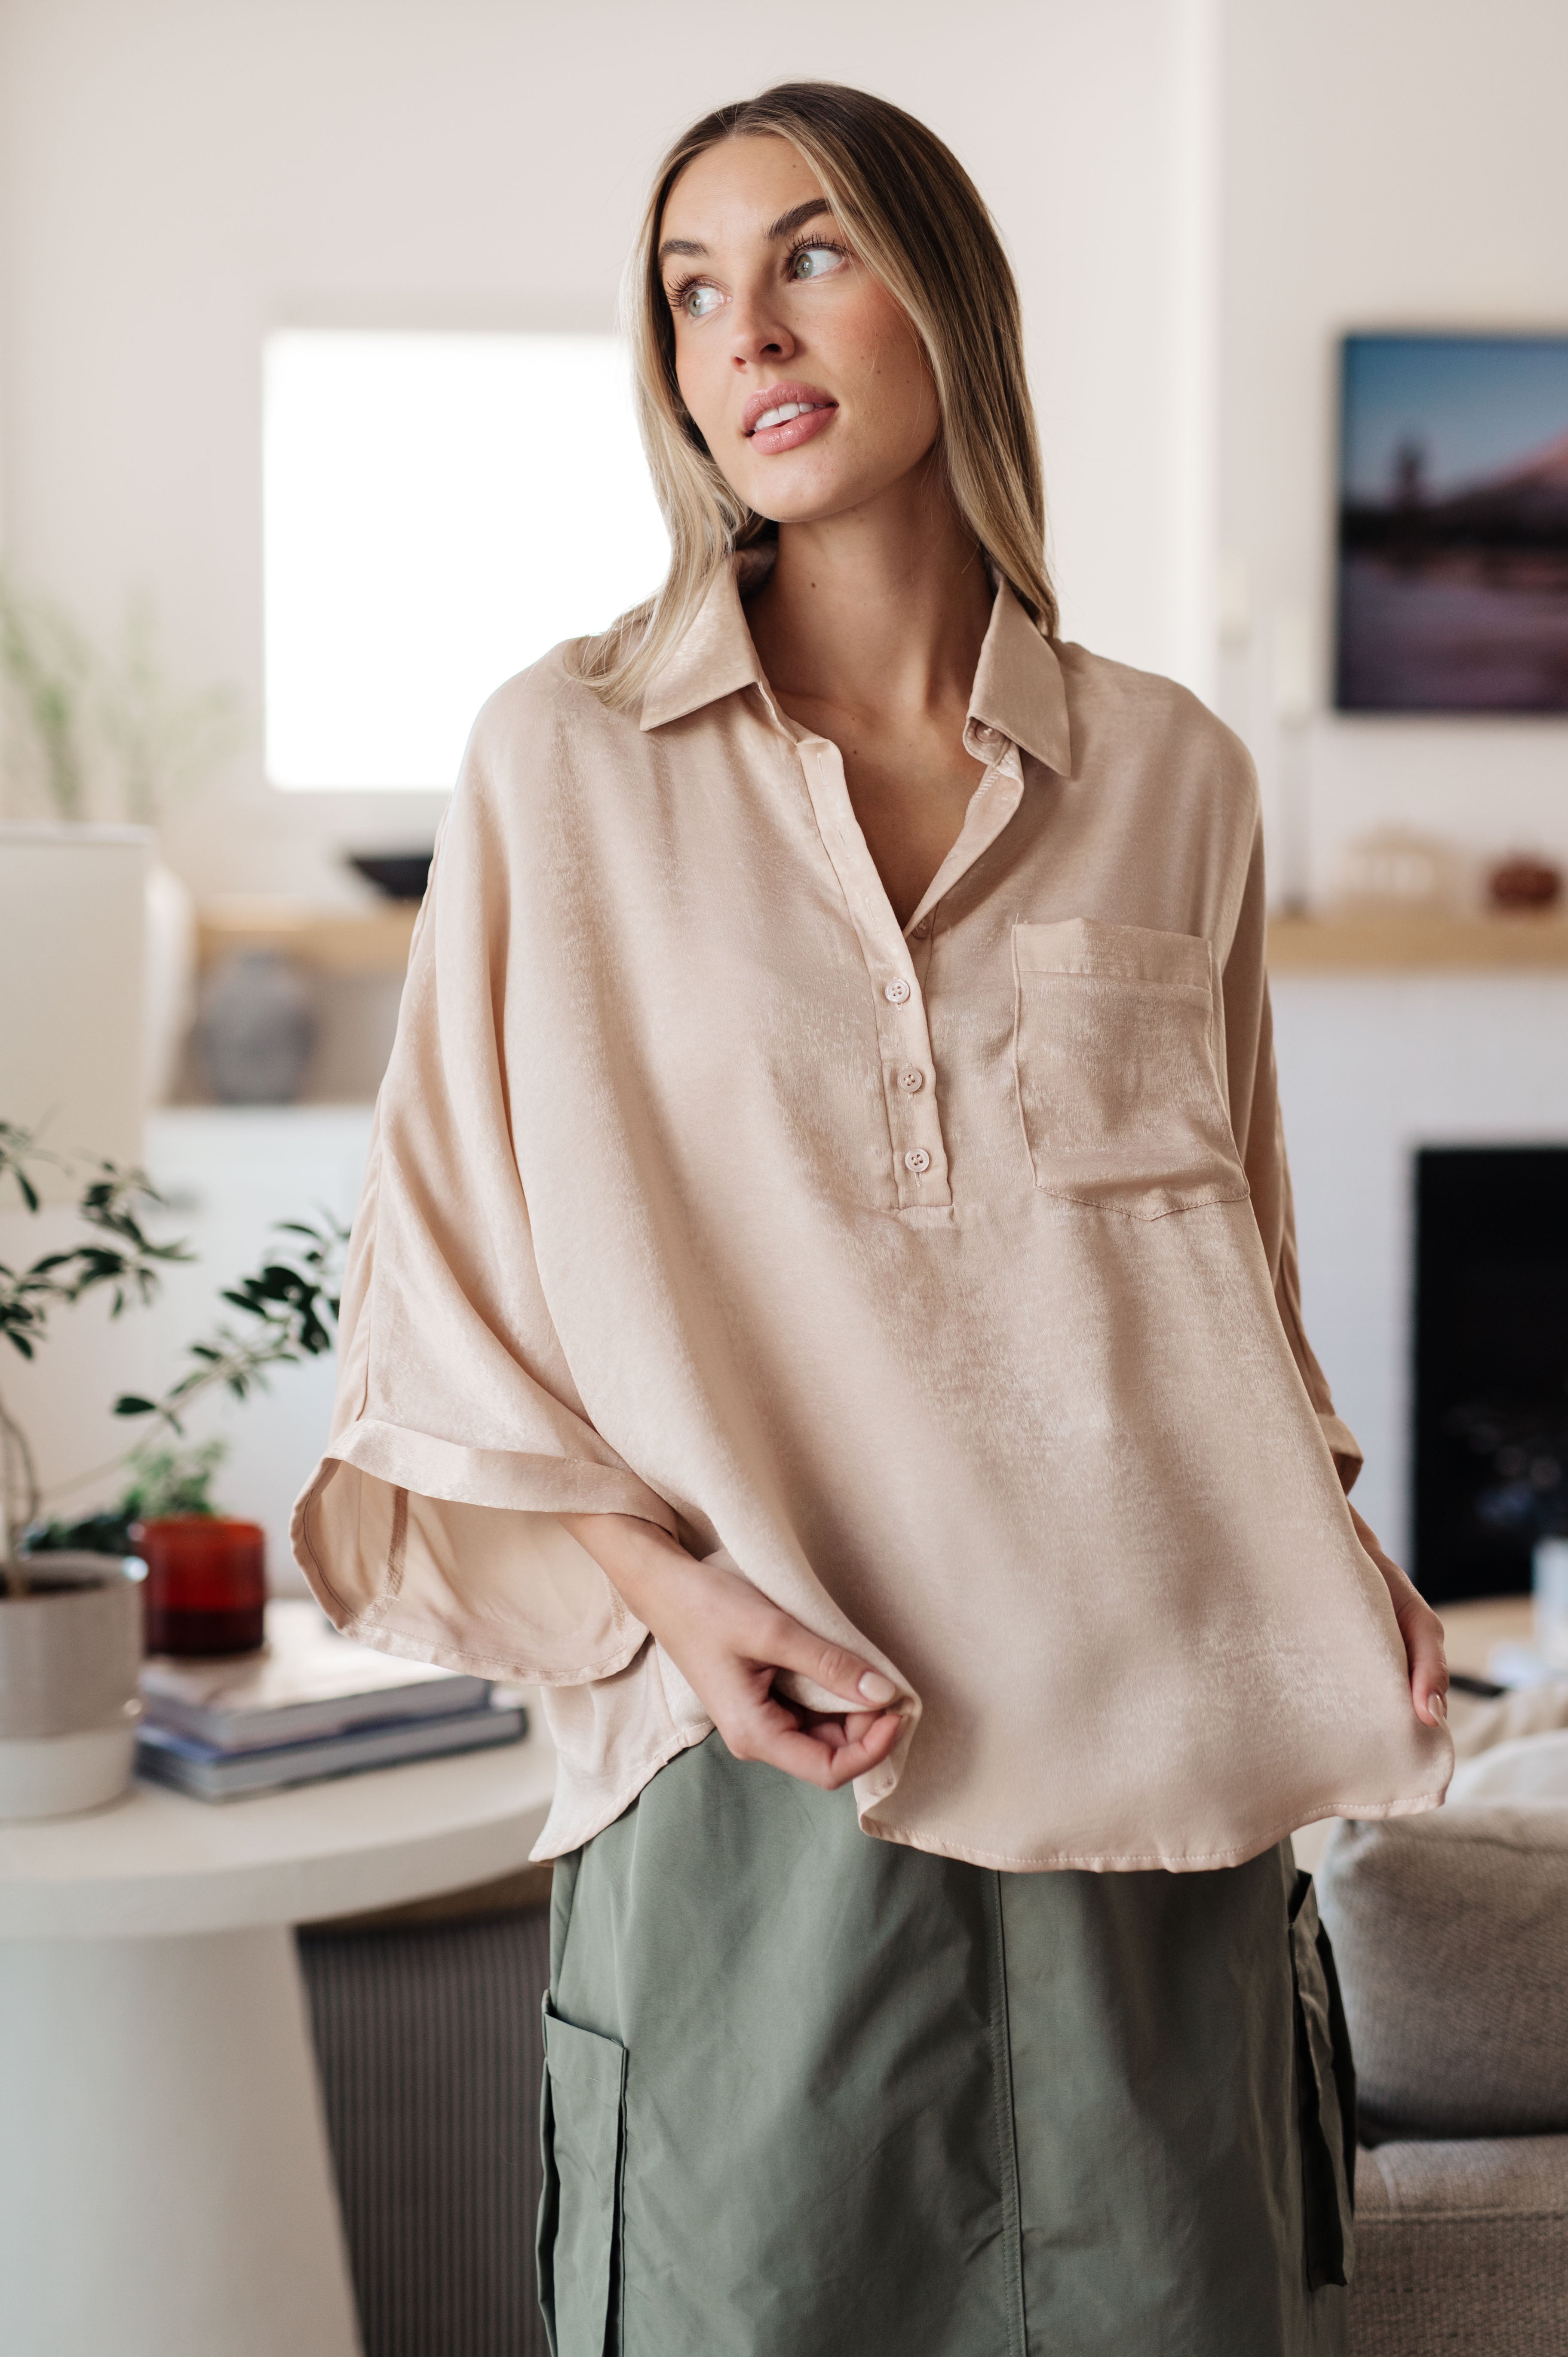 Agatha Oversized Dolman Sleeve Top in Champagne